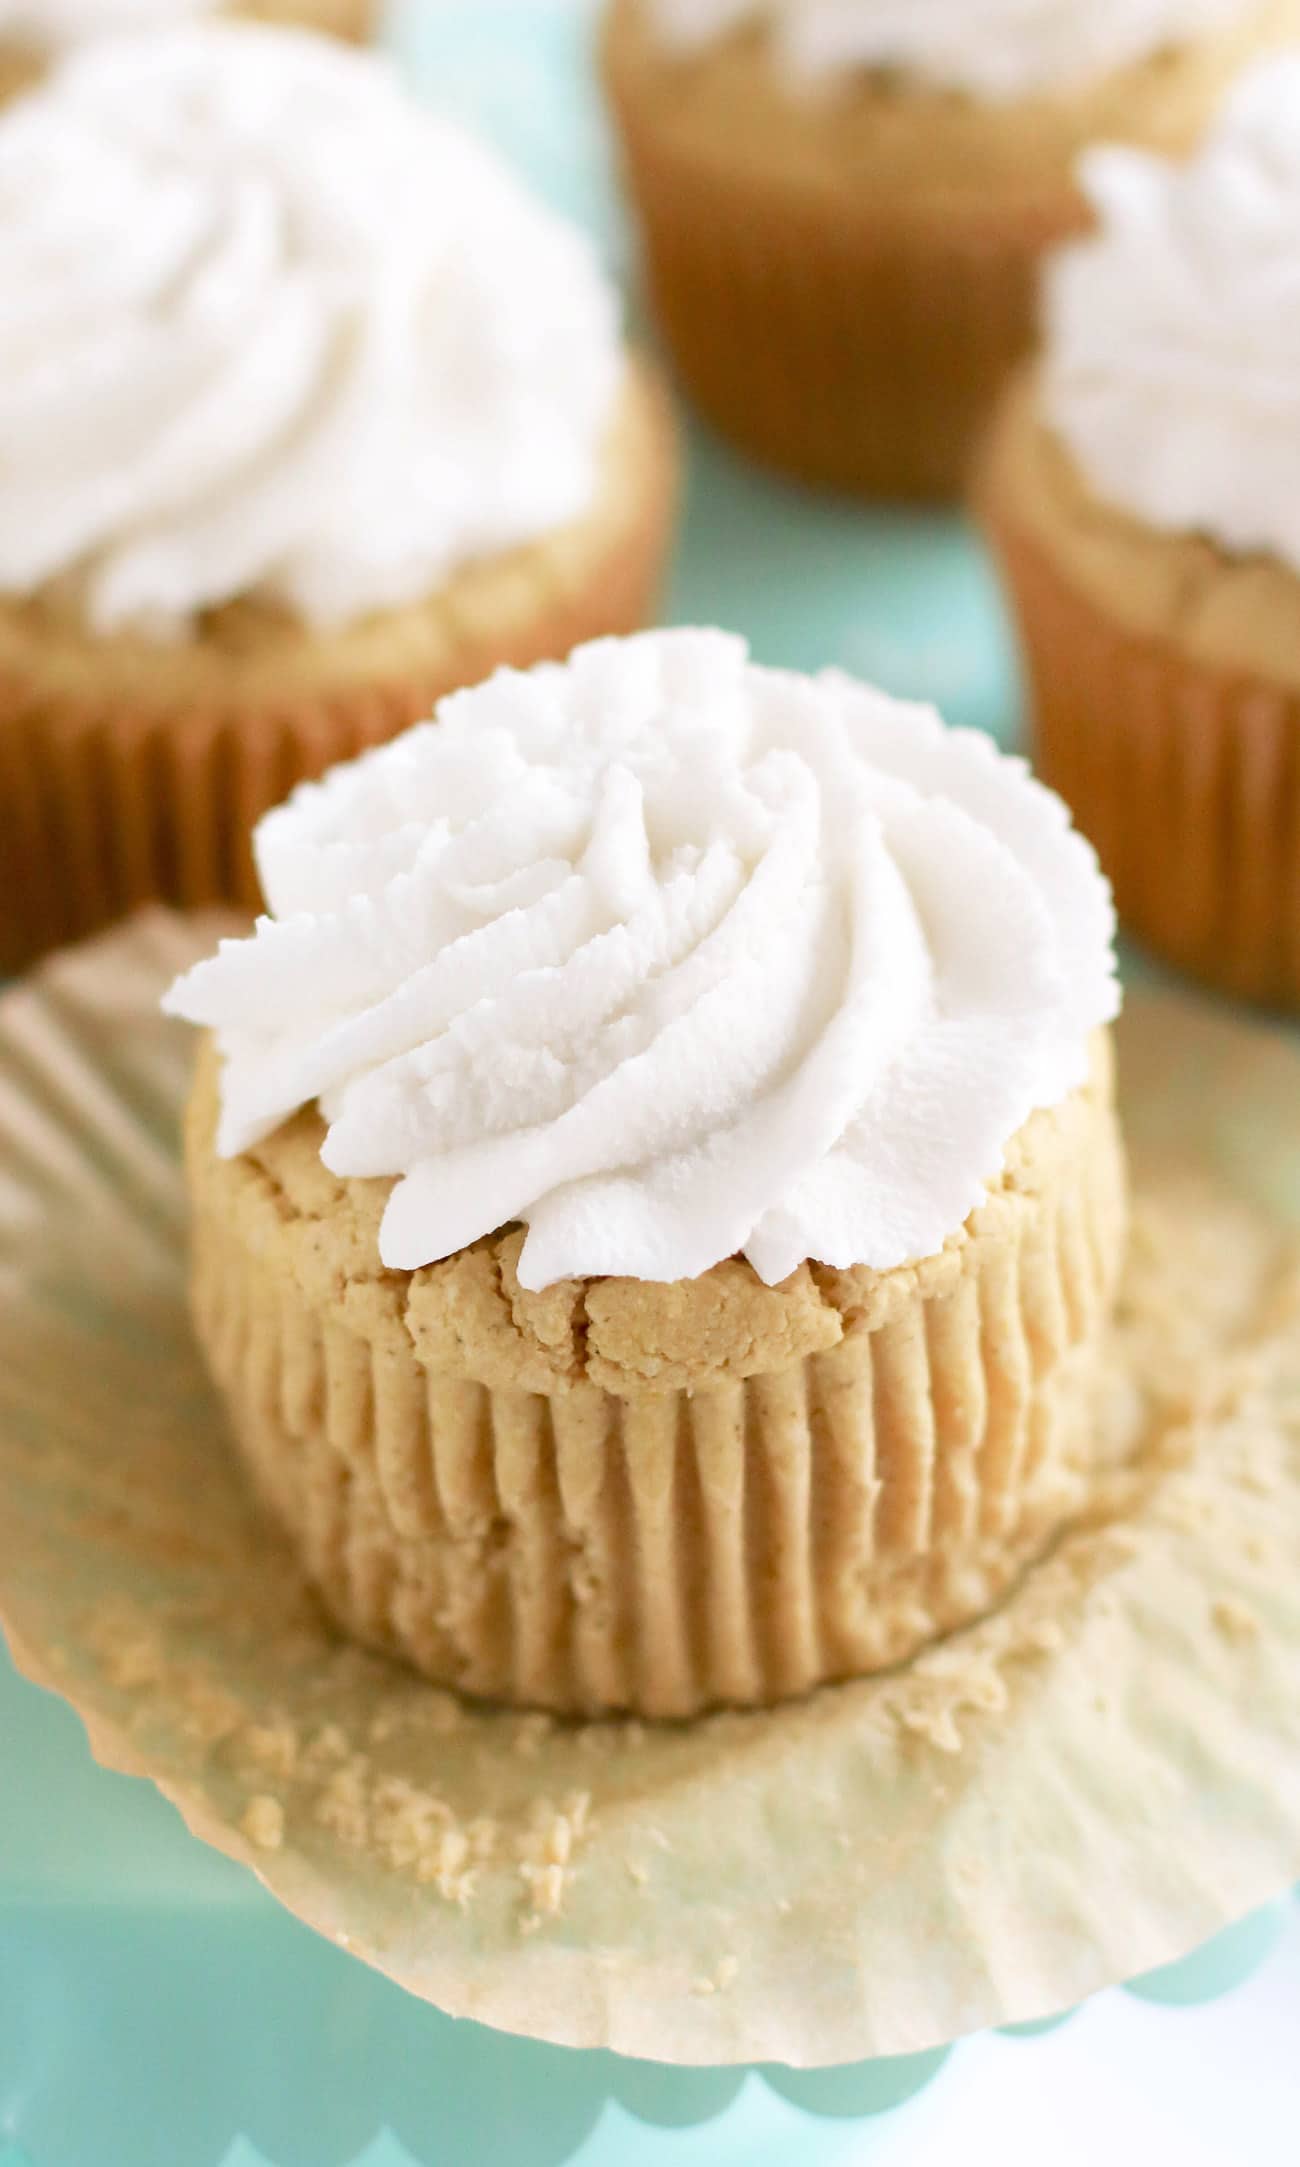 These Healthy Coconut Cupcakes are fluffy, springy, and moist! They're the most nutritious, guilt-free treat! Made with quinoa flour, sorghum flour, coconut yogurt, and coconut milk, so they're gluten free, dairy free, vegan, and sugar free!